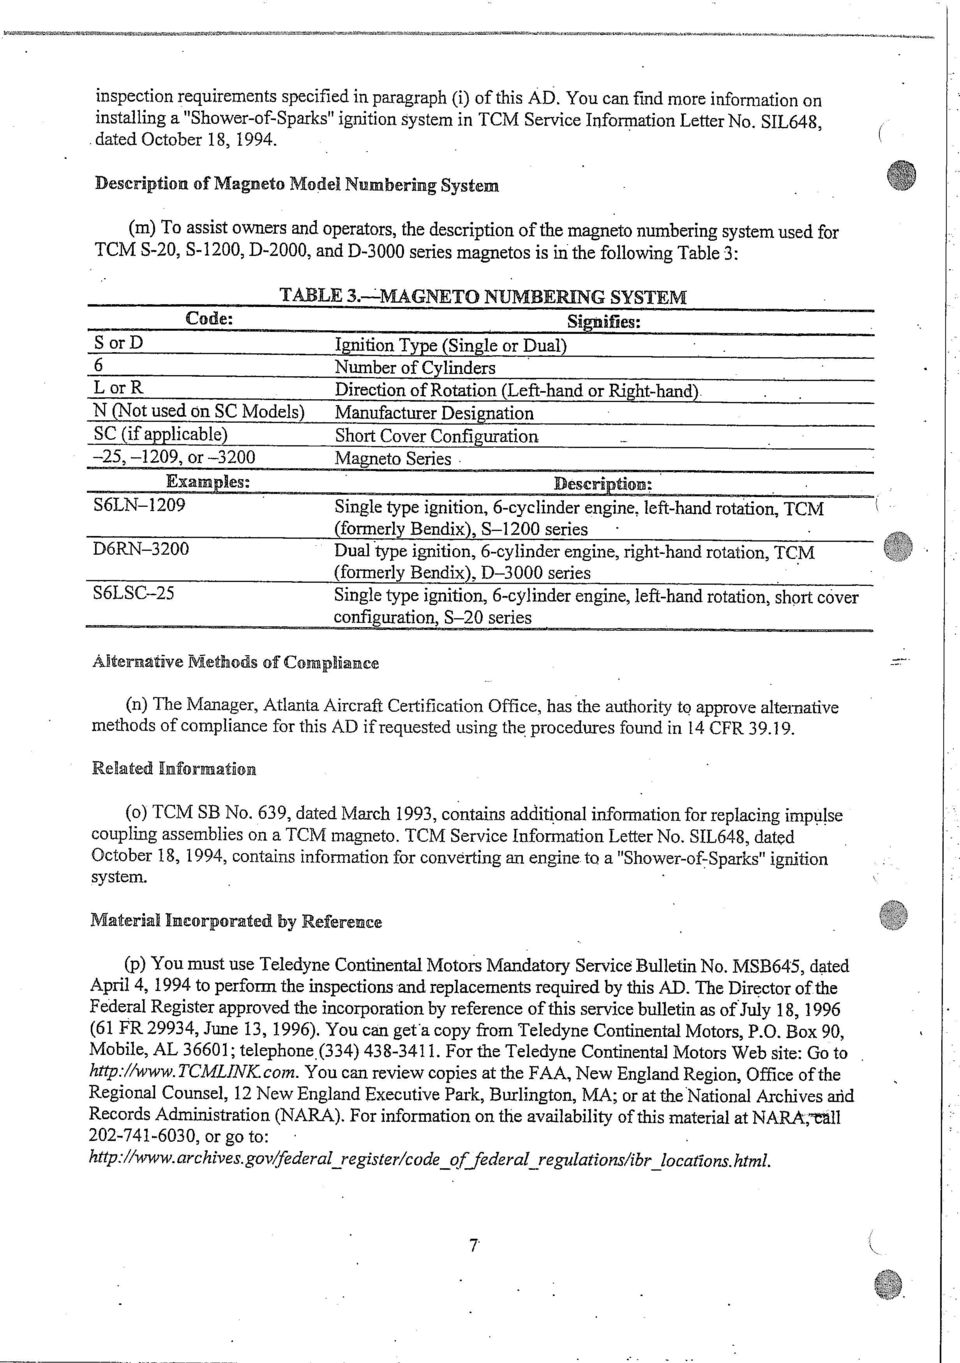 You can tind more information on installng a "Shower-of-Sparks" ignition system in TCM Service Information Letter No. SIL648,. dated October 18, 1994.